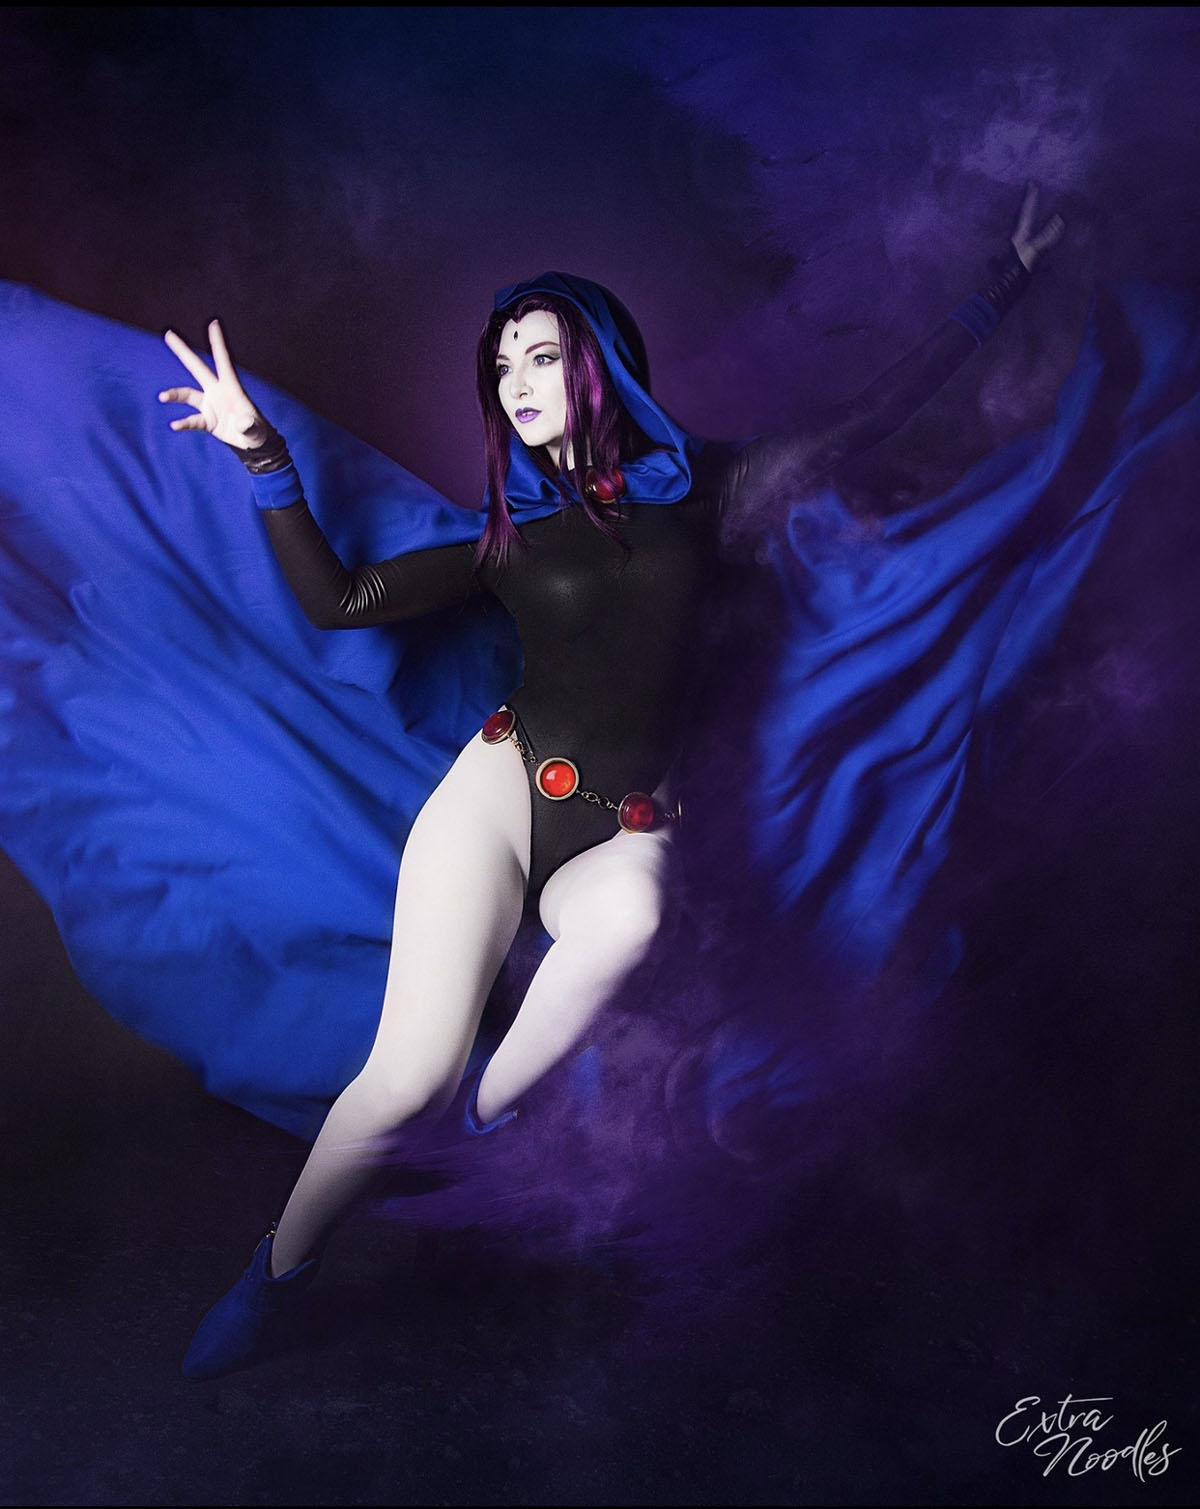 Raven from Teen Titans - photo by Extra Noodles